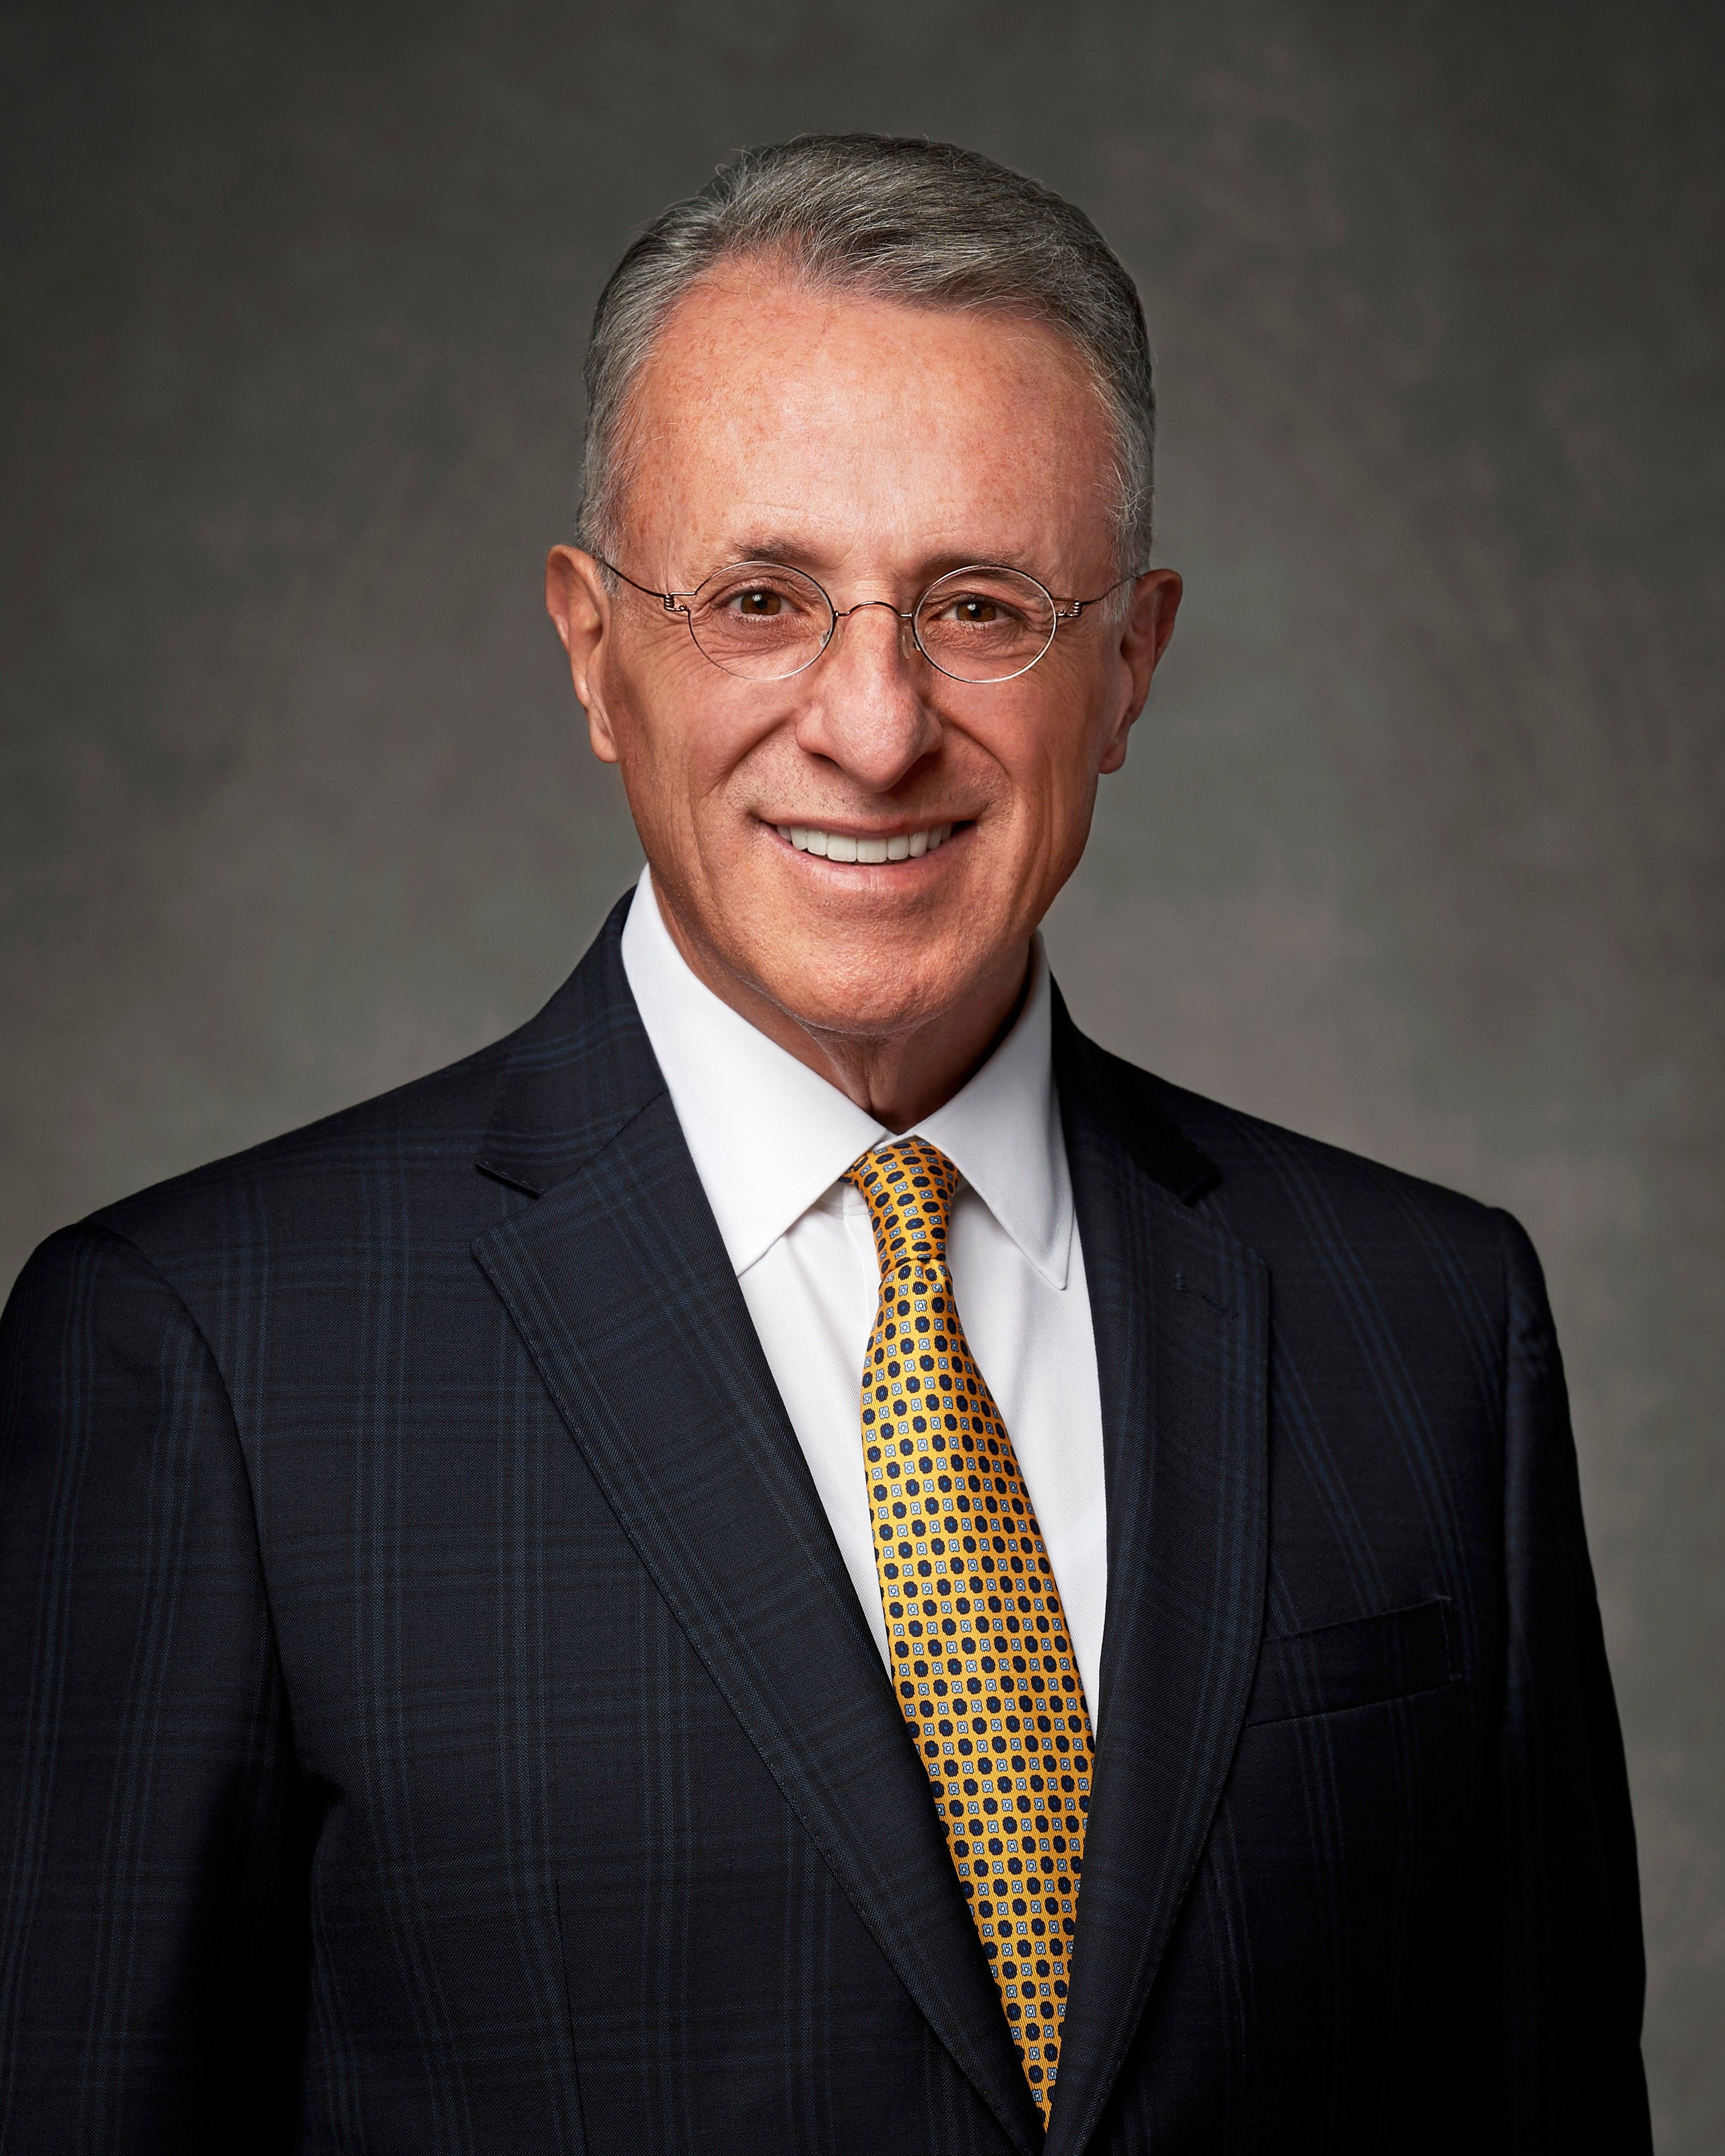 The official portrait of Ulisses Soares.